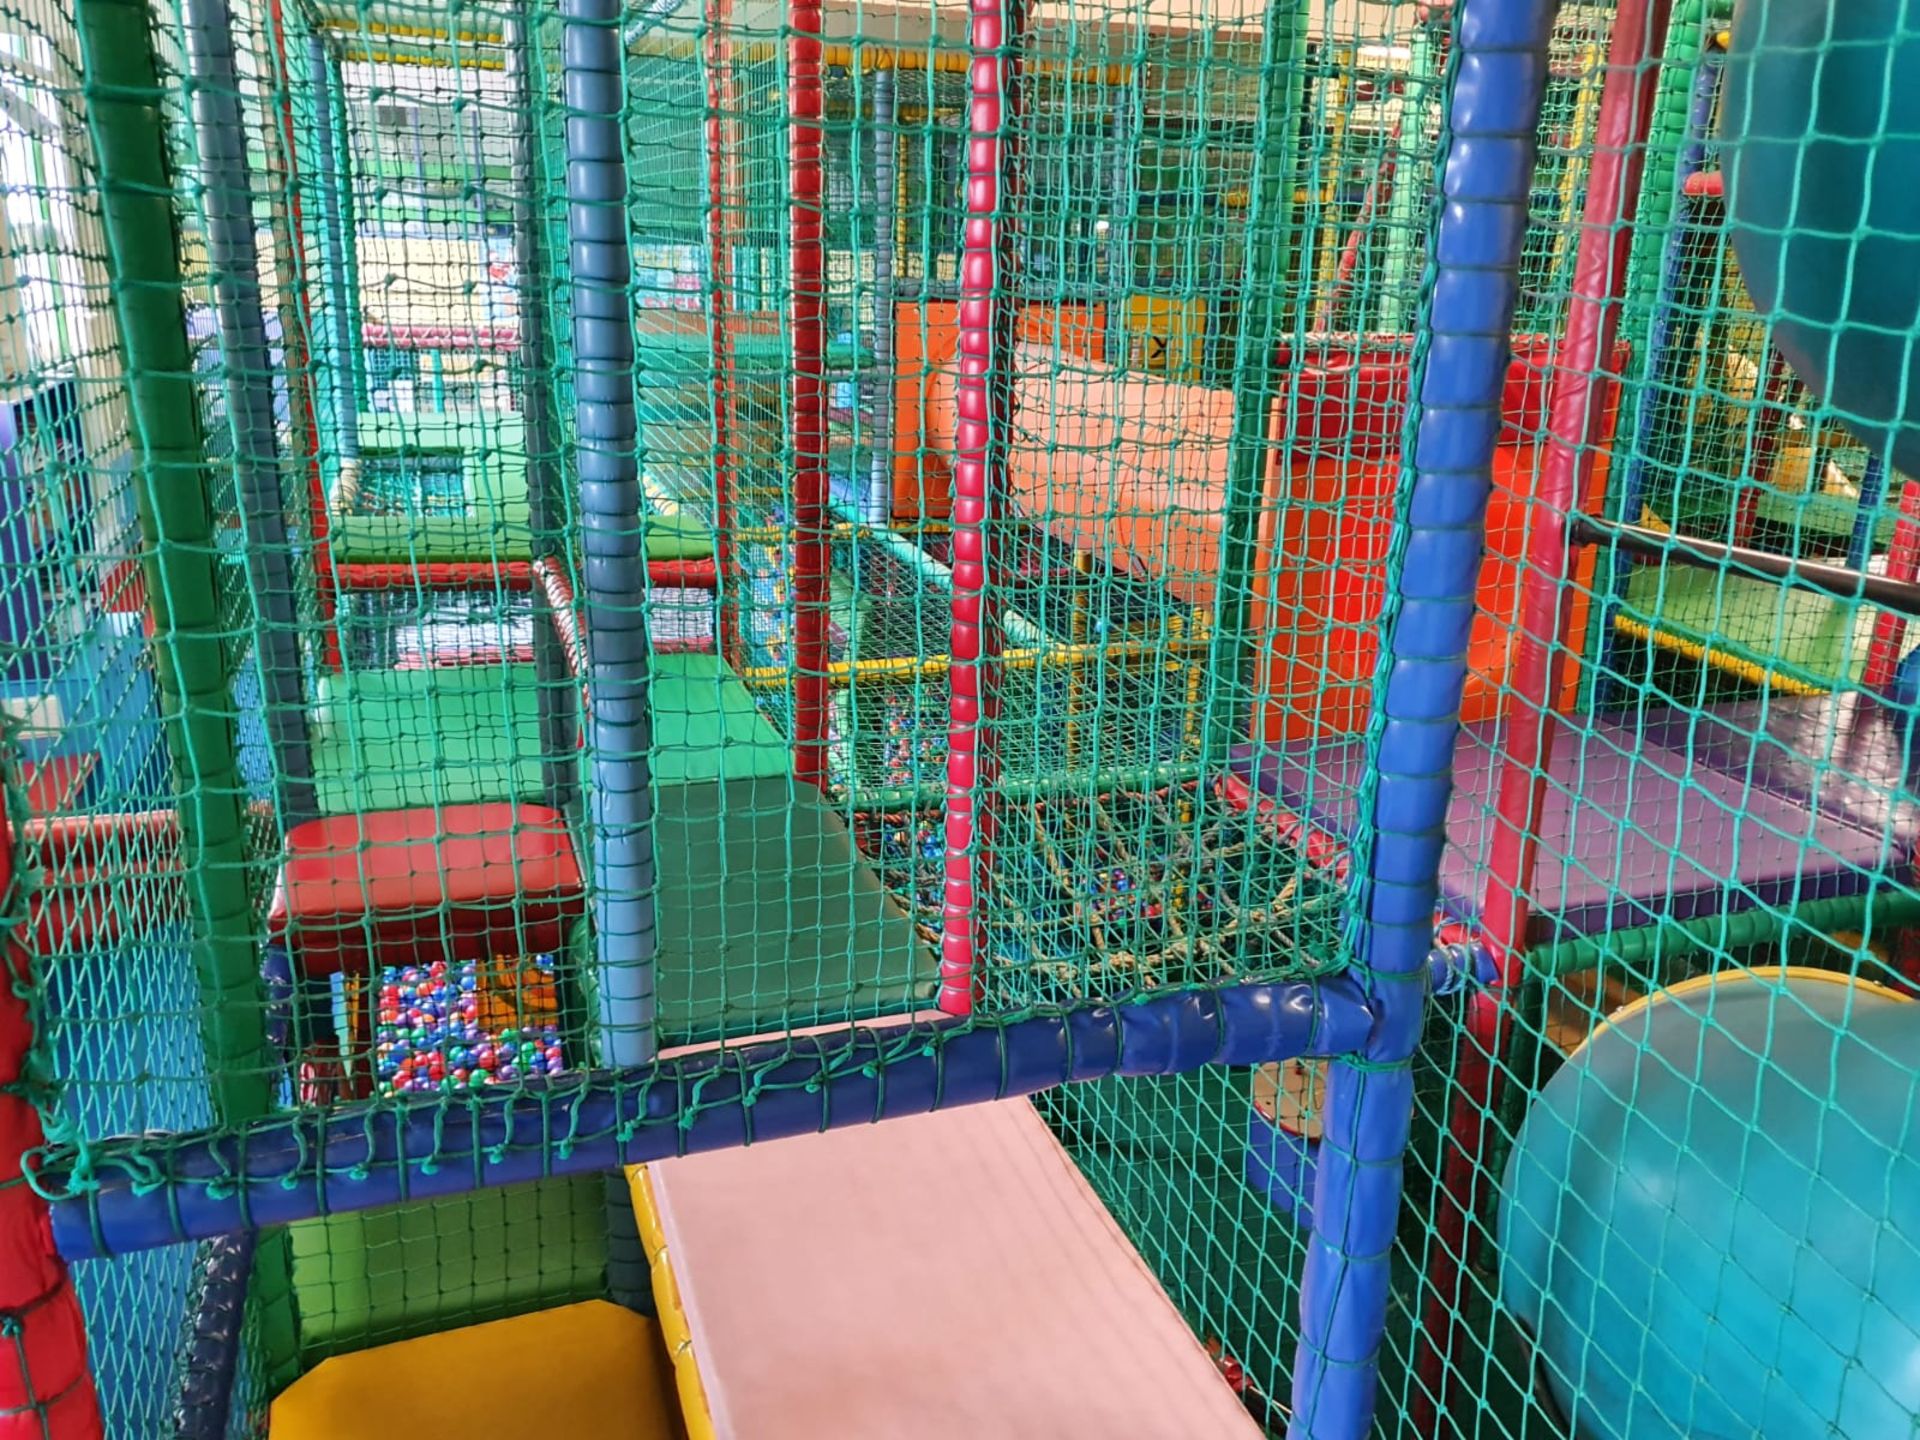 Bramleys Big Adventure Playground - Giant Action-Packed Playcentre With Slides, Zip Line Swings, - Image 124 of 128